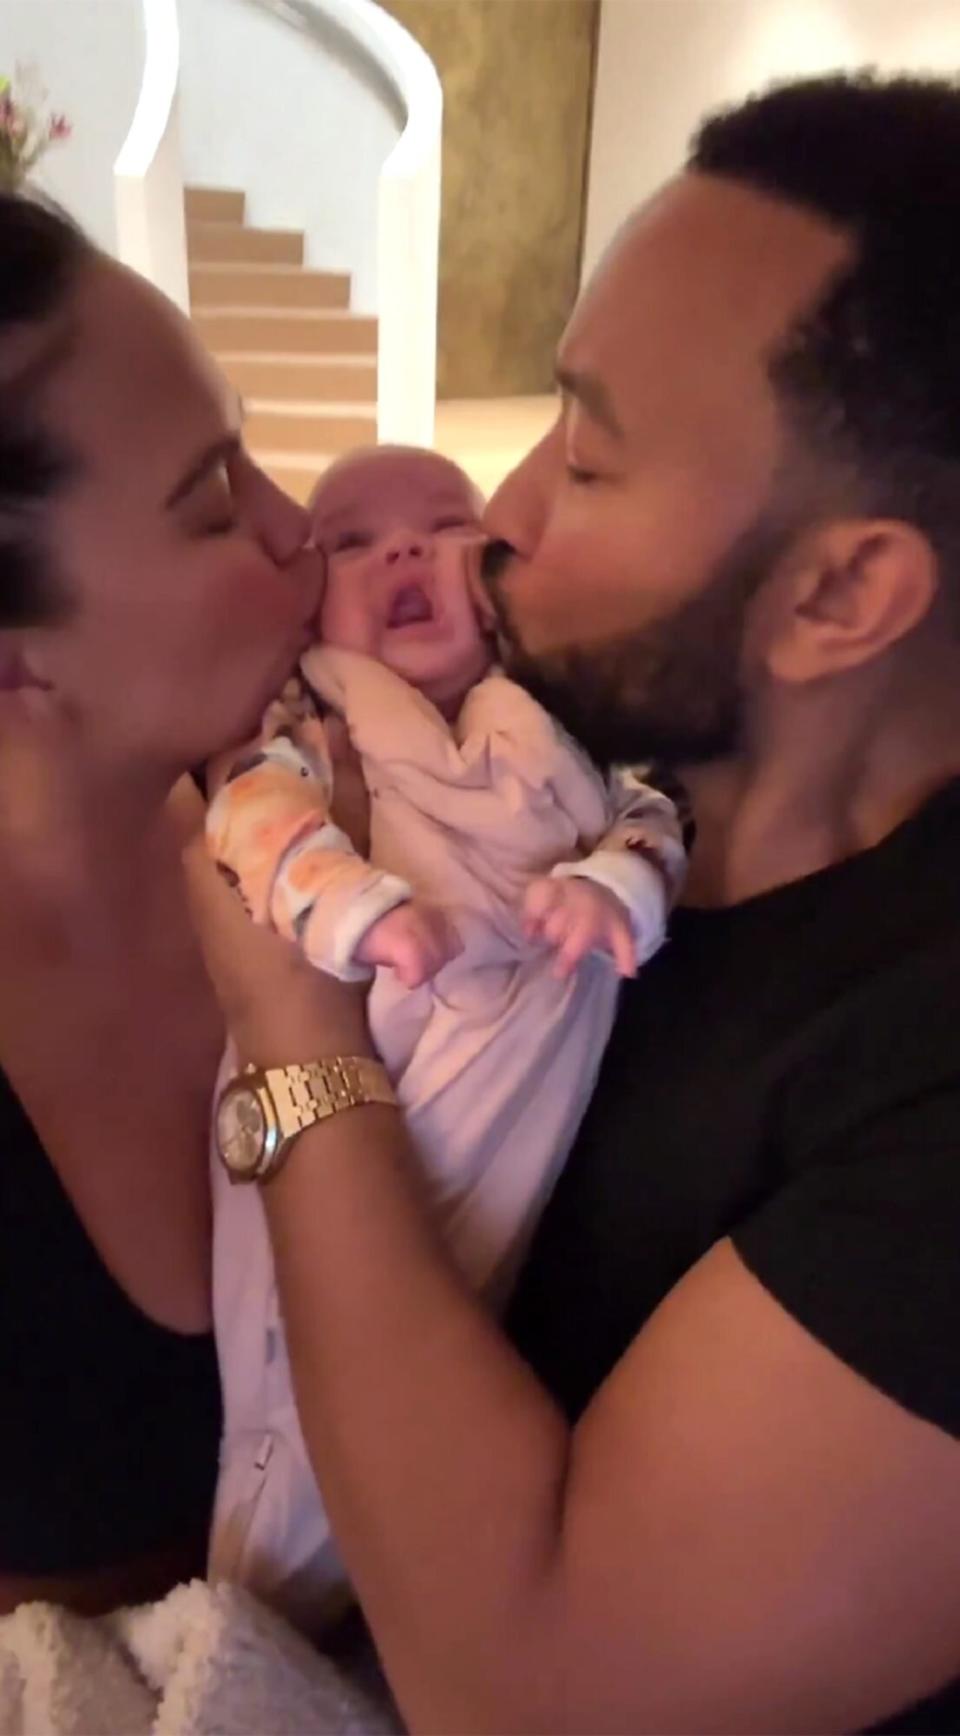 Chrissy Teigen and John Legend Give Baby Daughter Esti a Sandwich Kiss In Adorable New Video